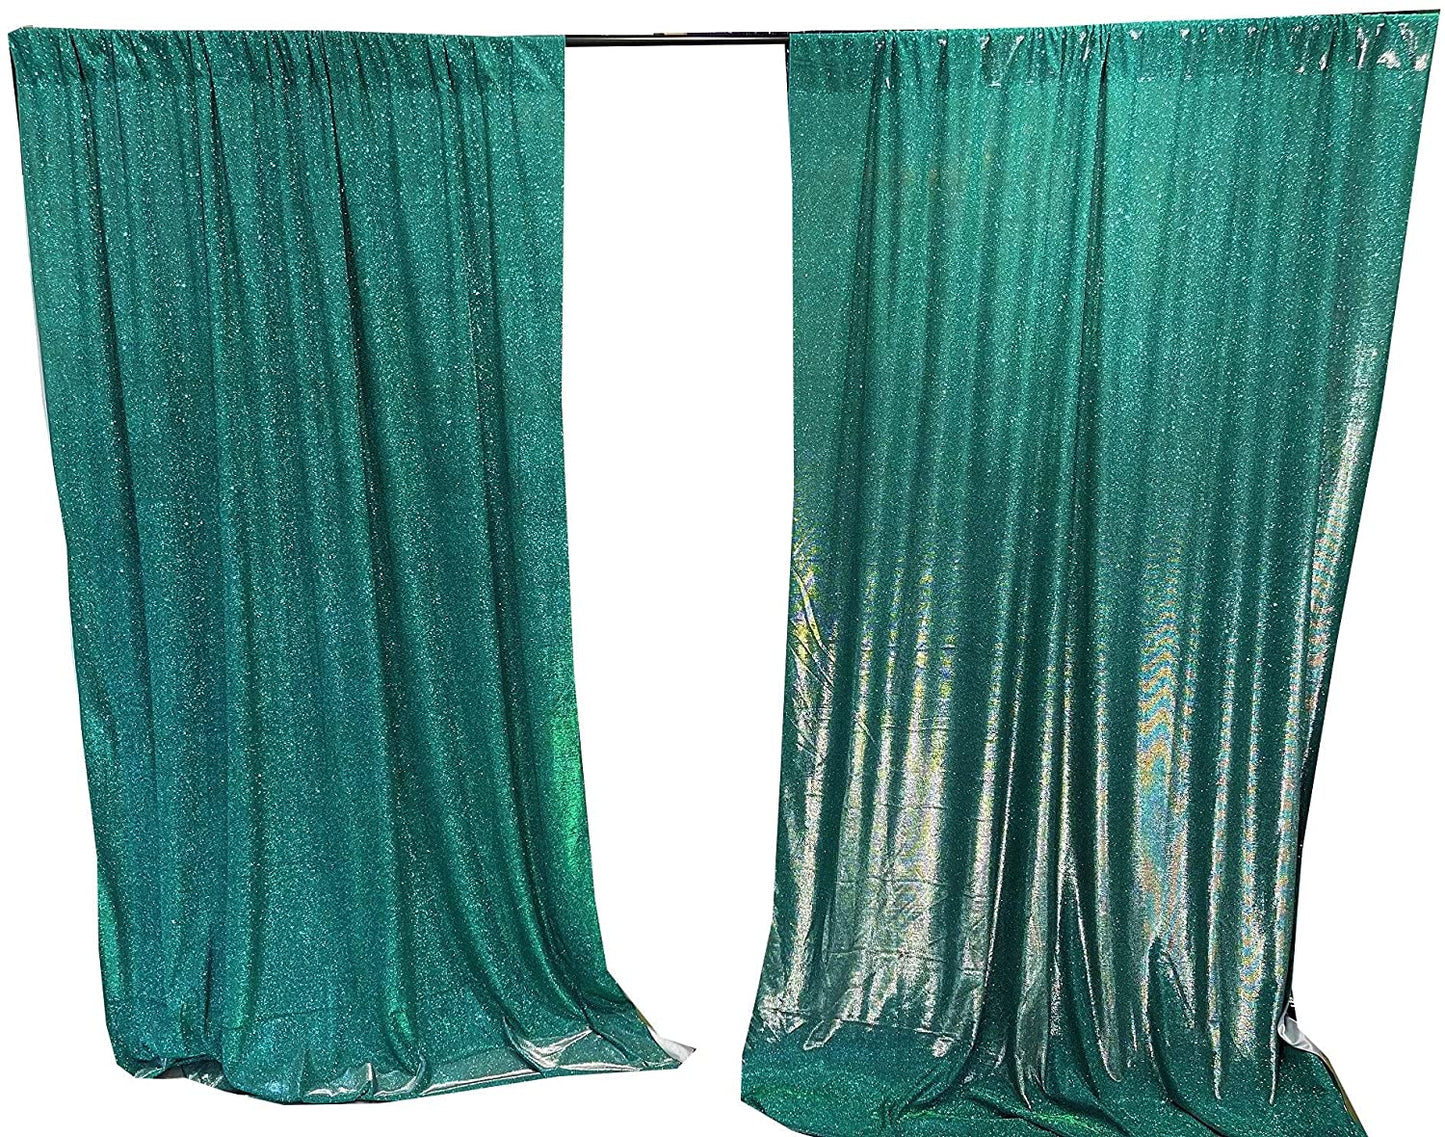 Full Covered Glitter Shimmer on Fabric Backdrop Drape - Curtain - Wedding Party Decoration (2 Panels Jade